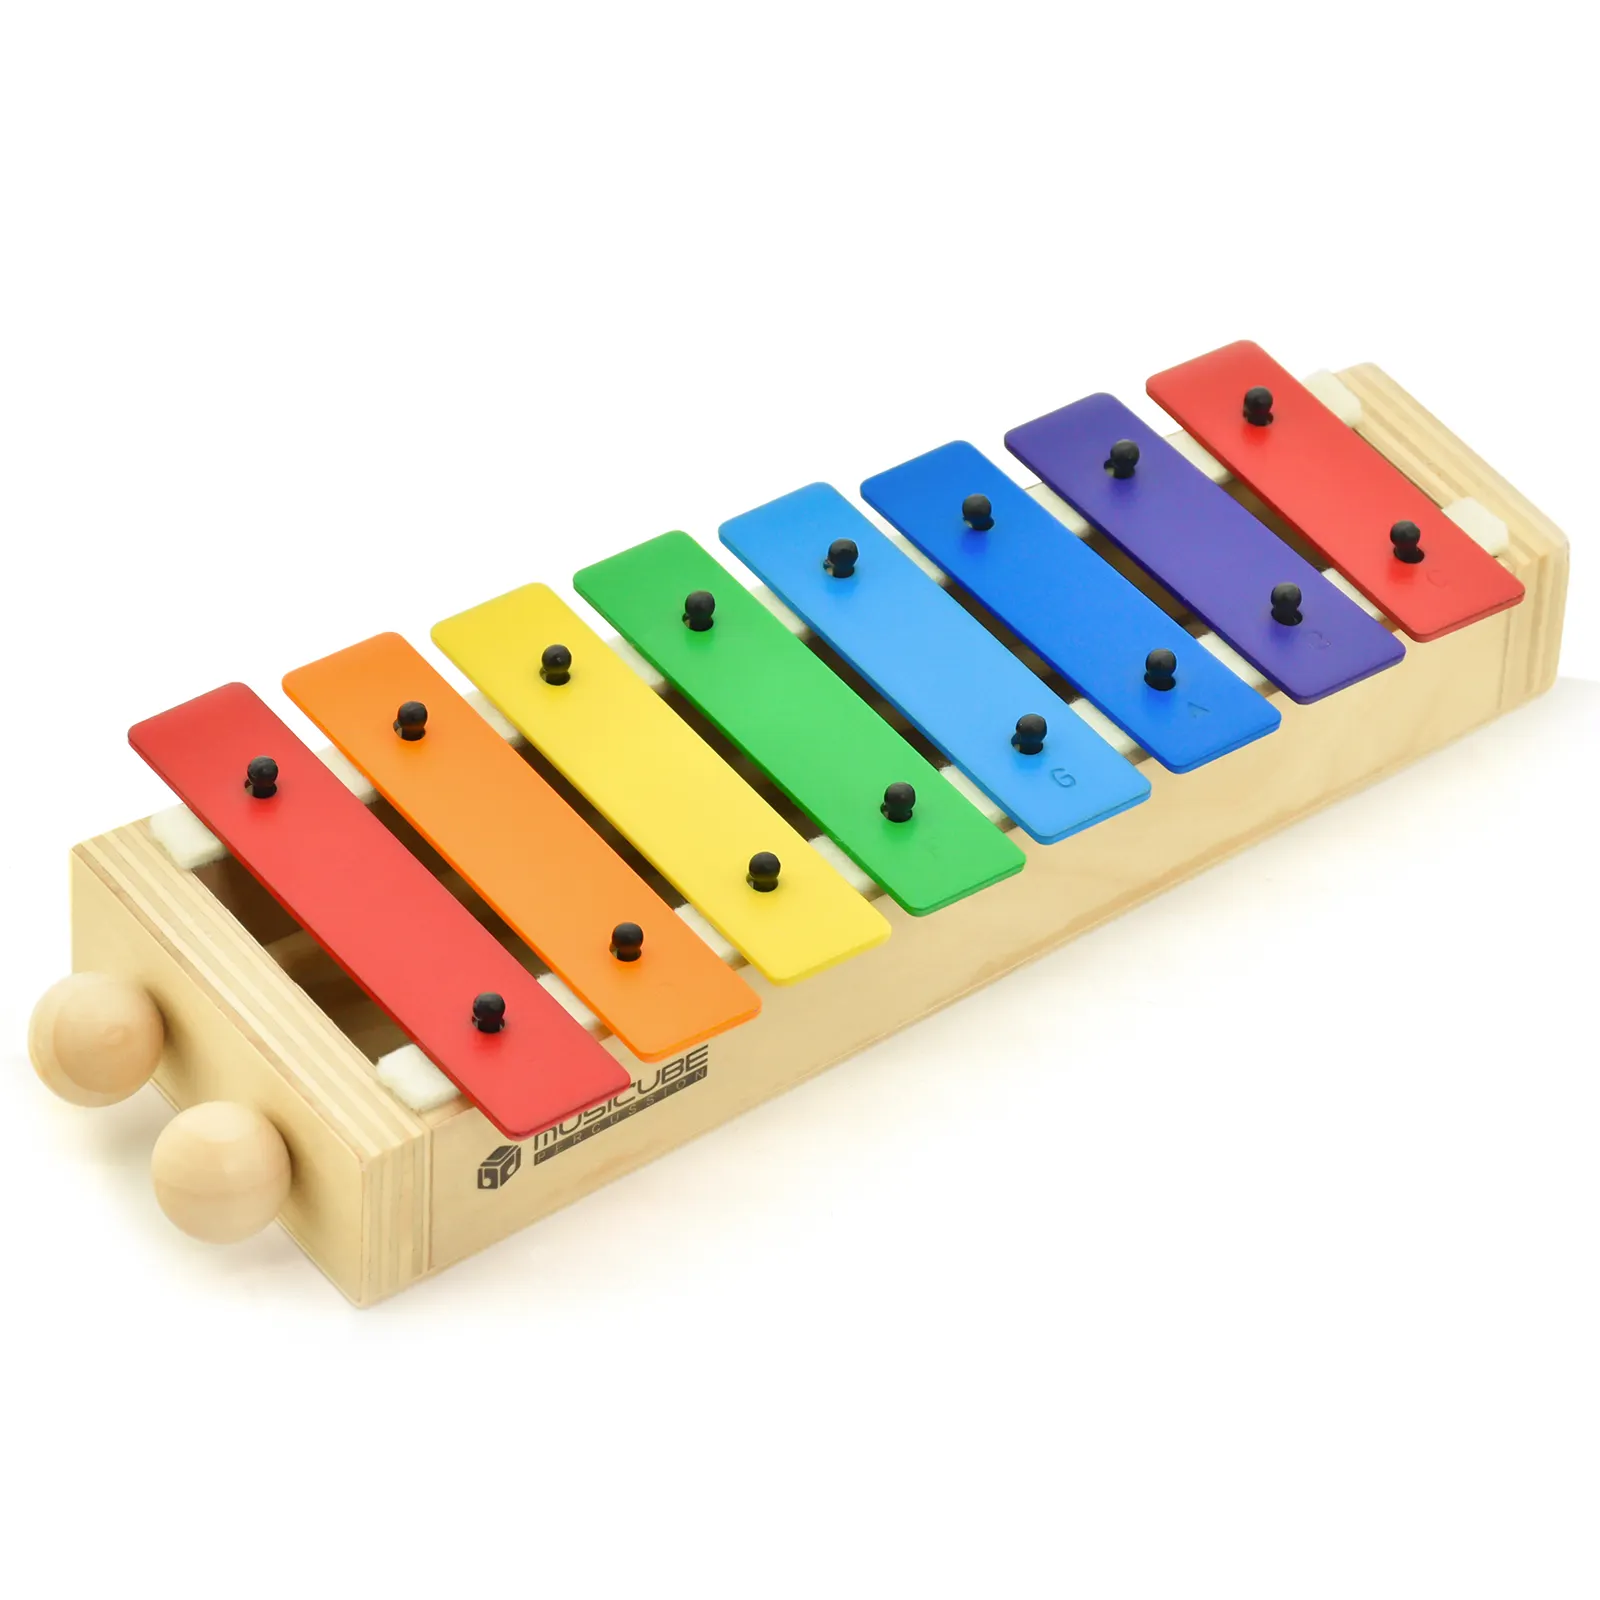 8 Tones Musical Instrument Lovely Xylophone Music Toy Kids Wooden Xylophone Educational Accordion Color Box High Five 8 Scales